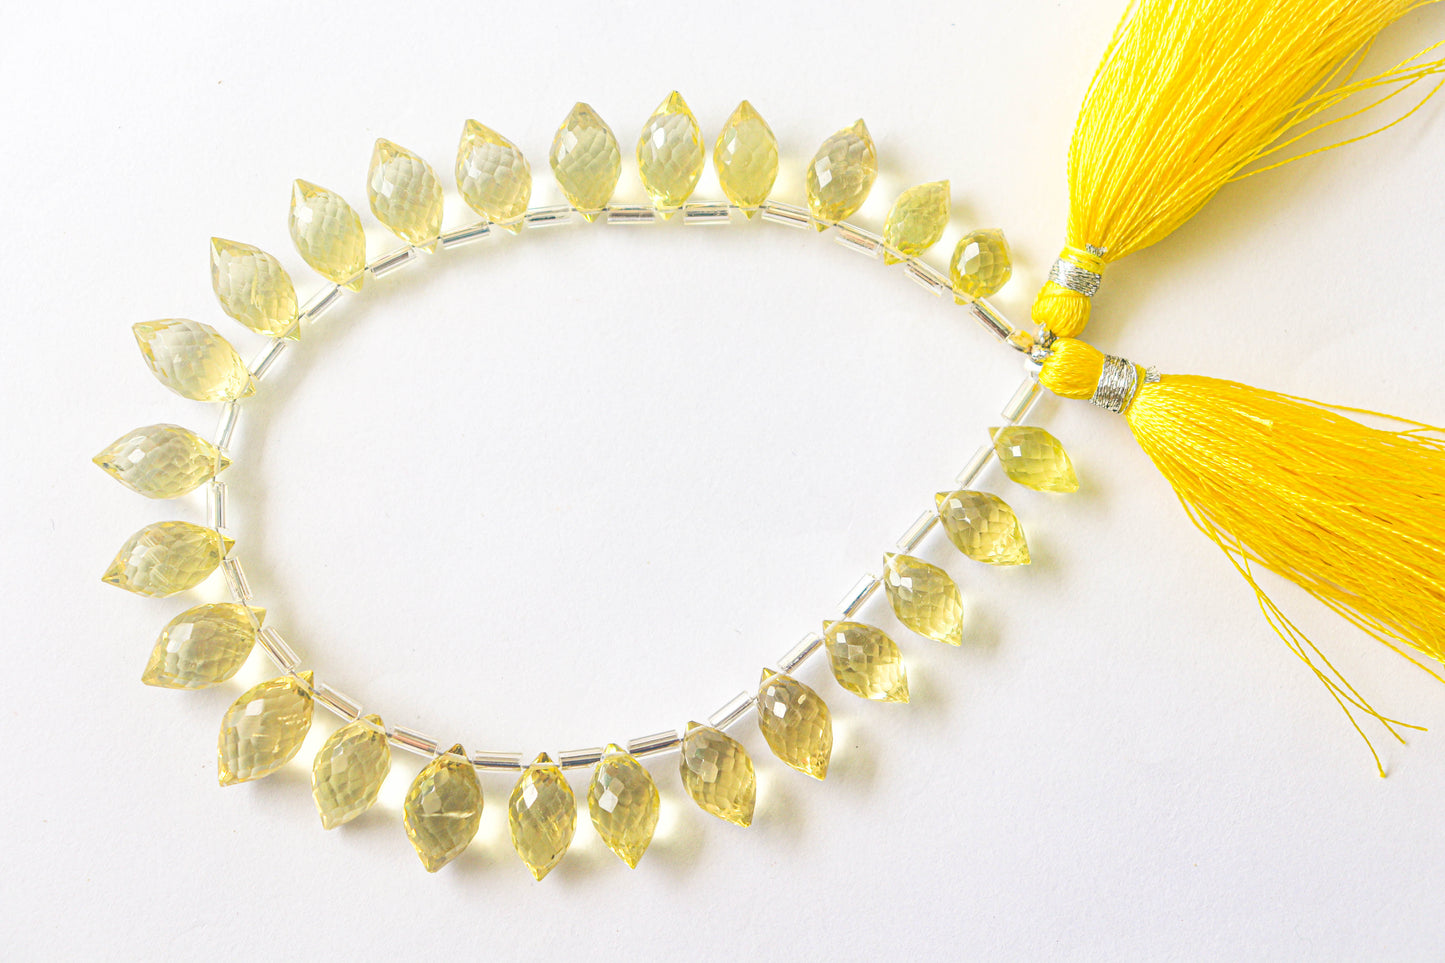 Lemon Quartz Faceted Rice Drops Beads Beadsforyourjewelry